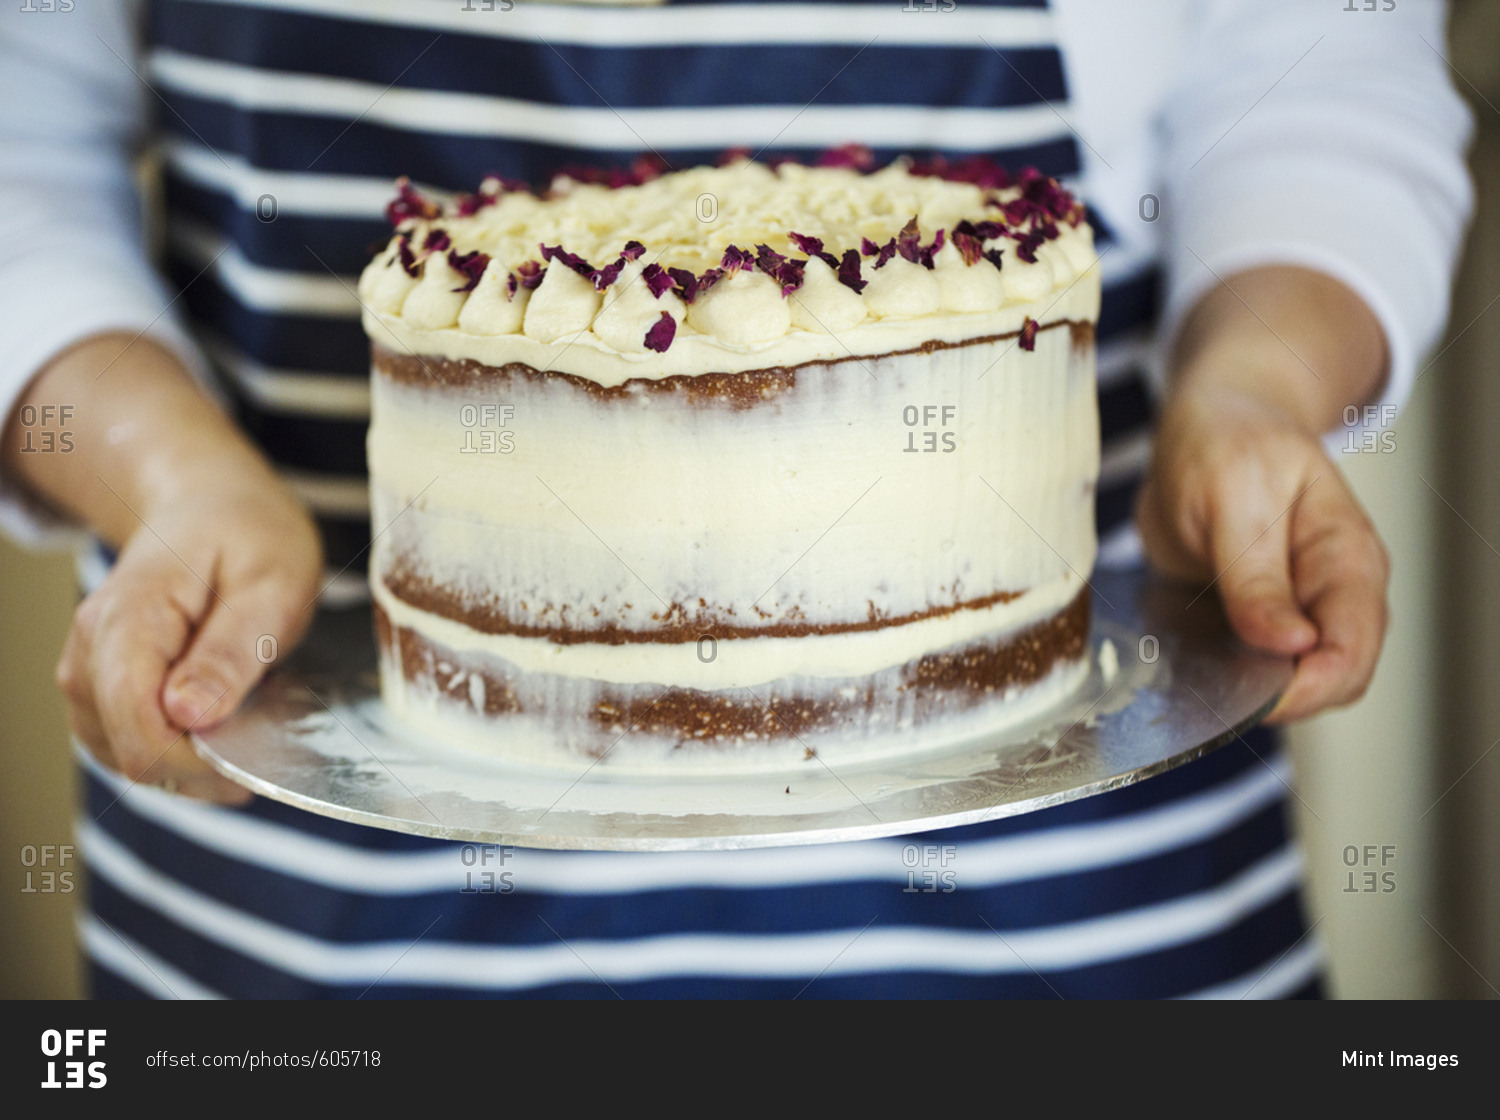 Close up of person wearing a blue and white stripy apron holding a cake decorated with cream and purple flower petals